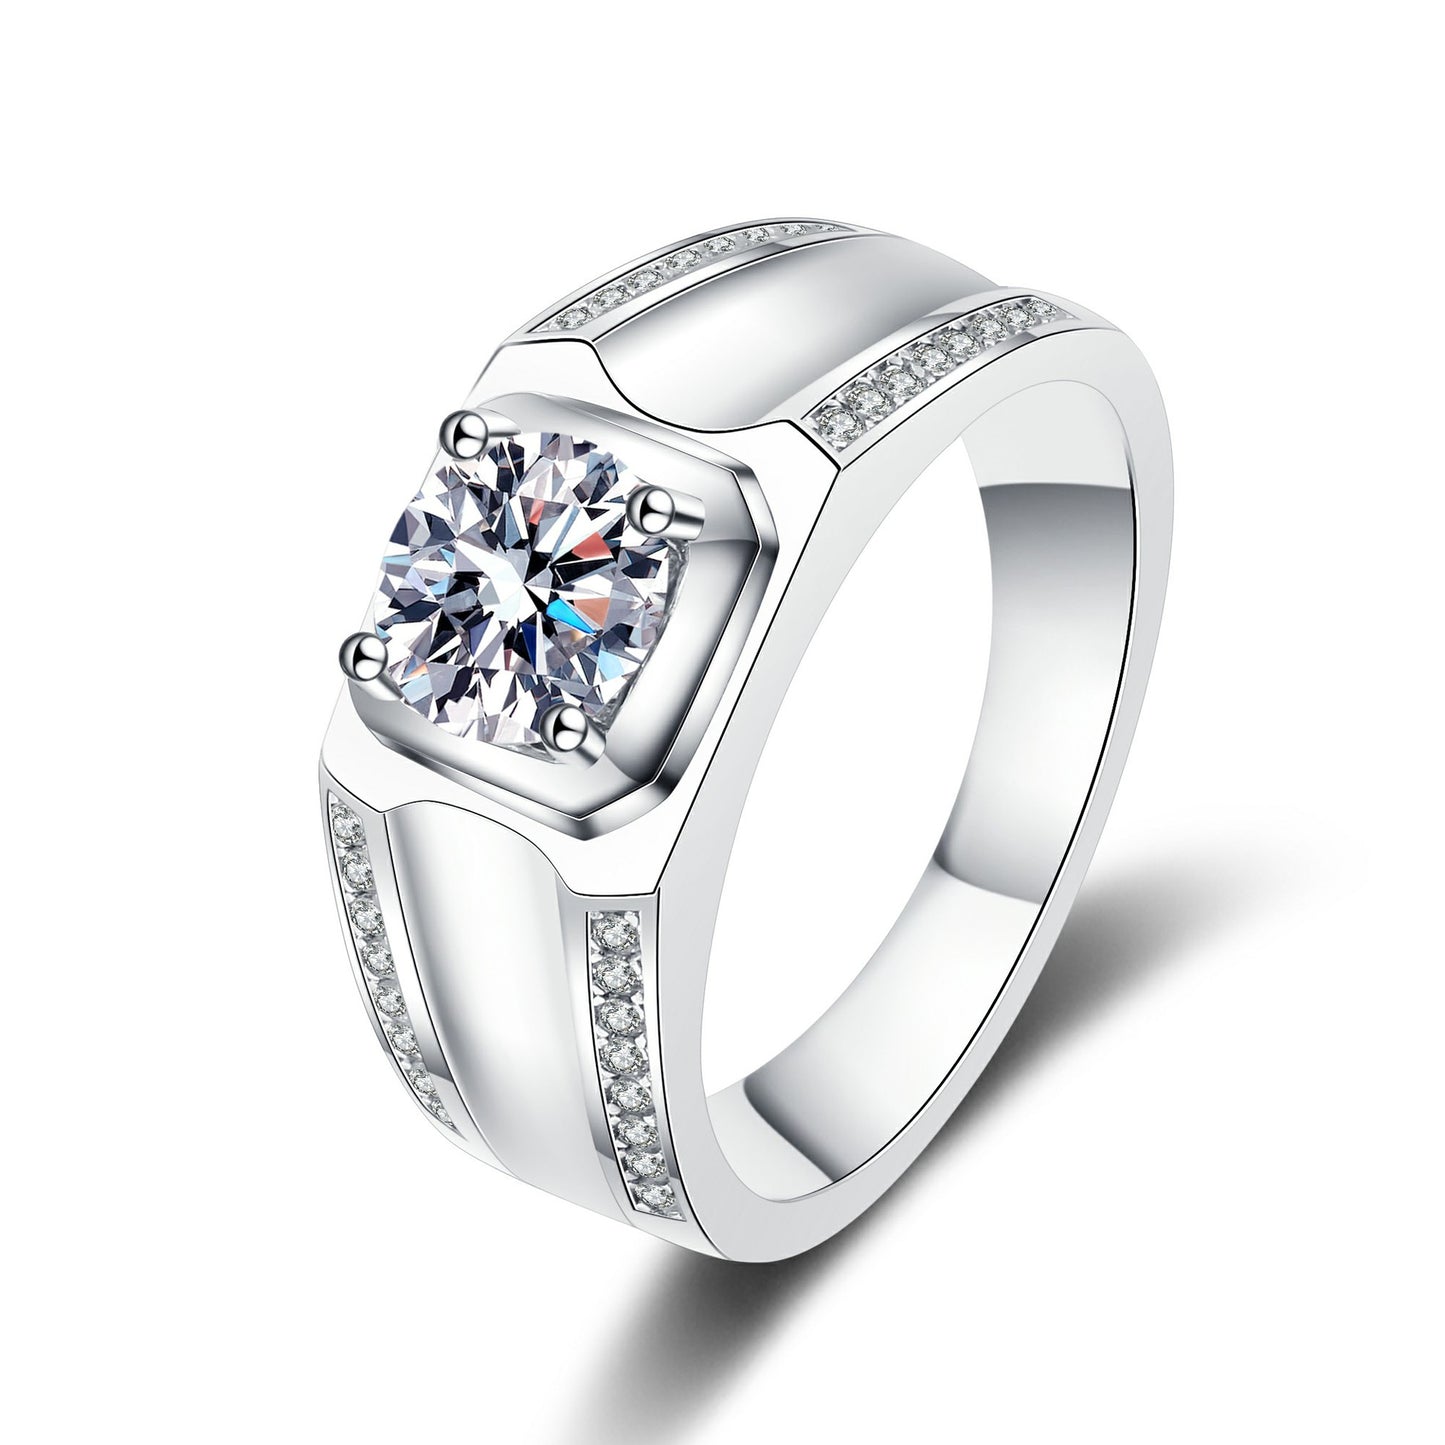 1 Carat Round Moissanite Men's Ring with Vintage-Inspired Design in White Gold-Plated 925 Silver